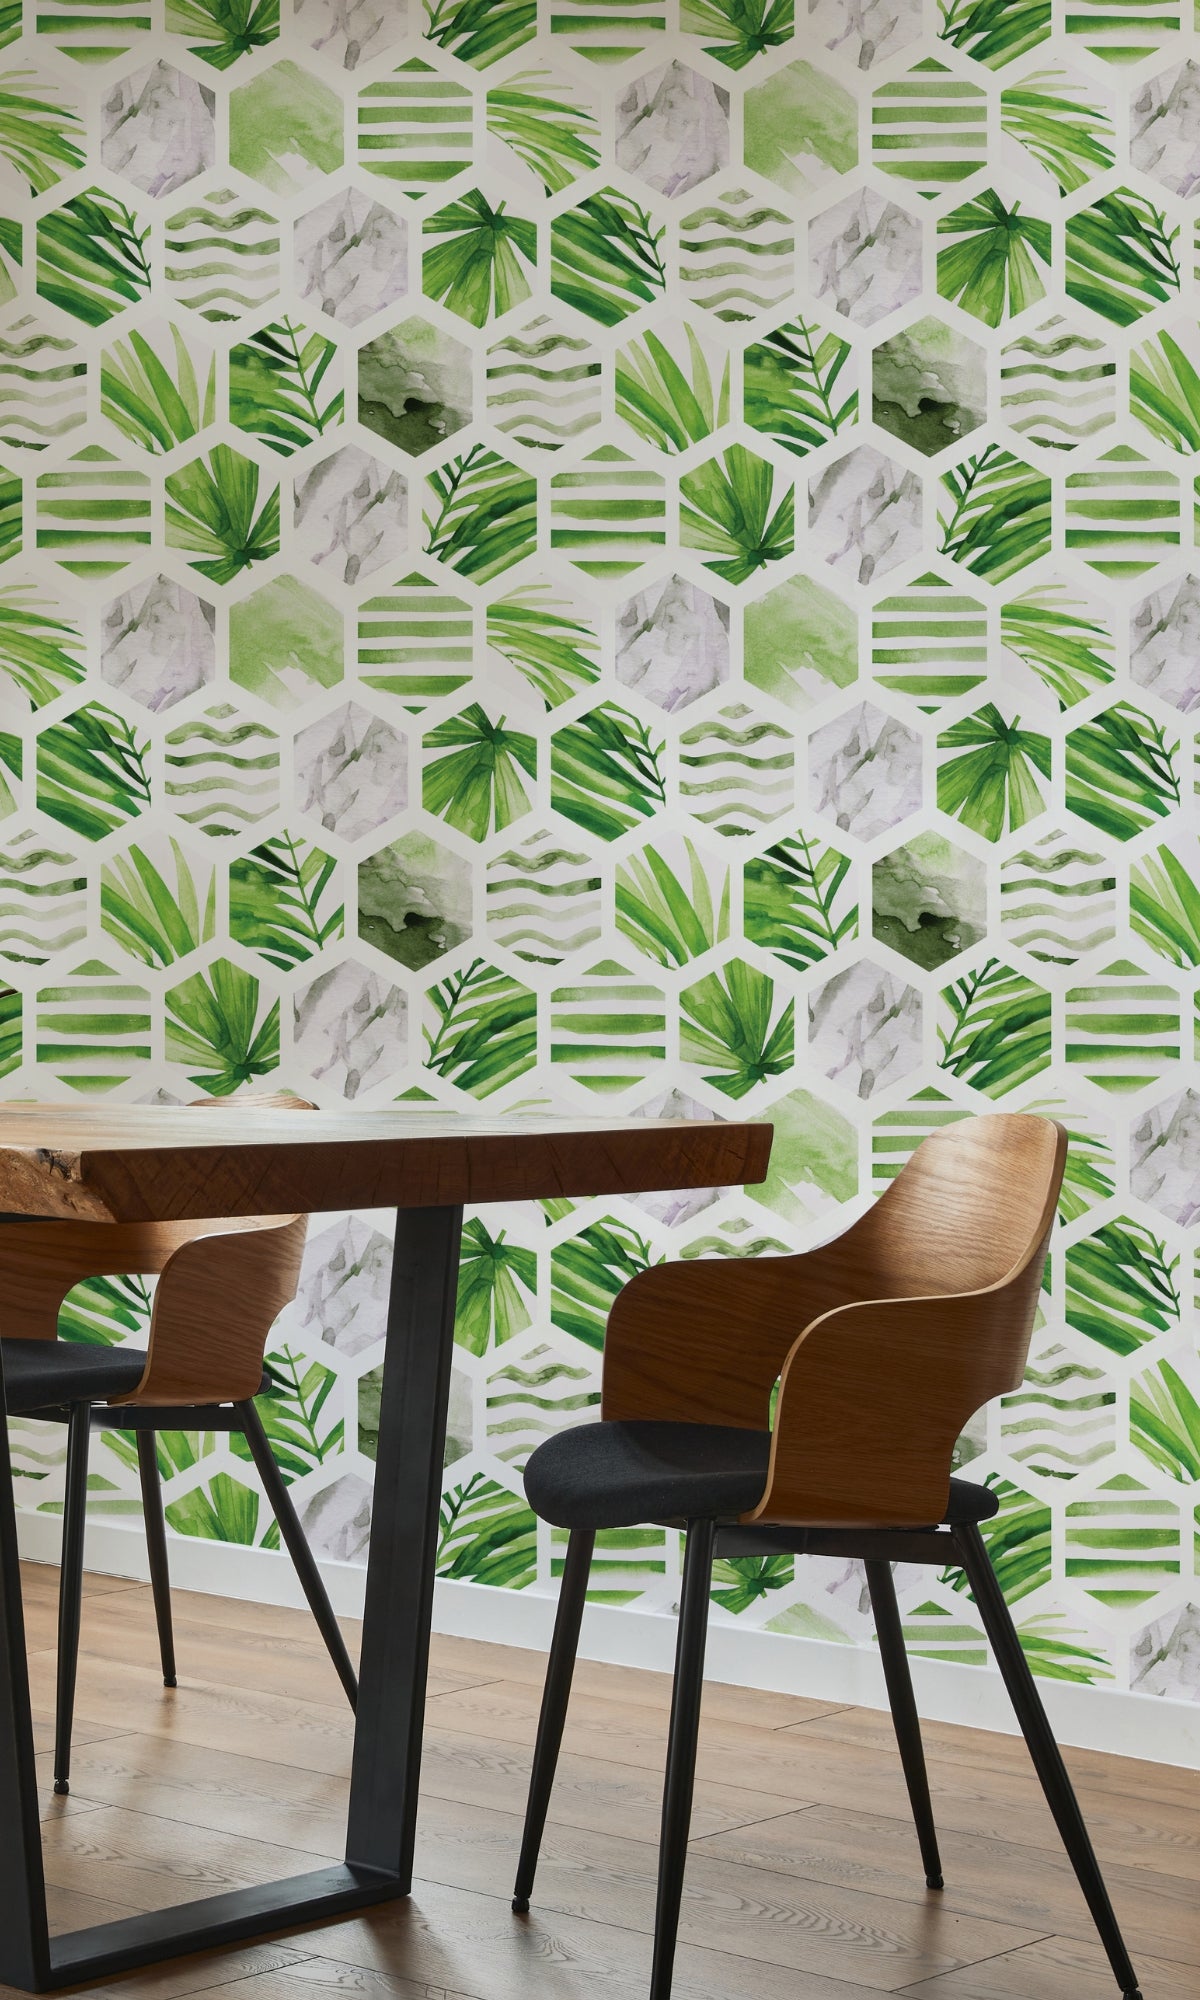 Watercolour Hexagon with Palm Leaves Mural Wallpaper M1309-Sample